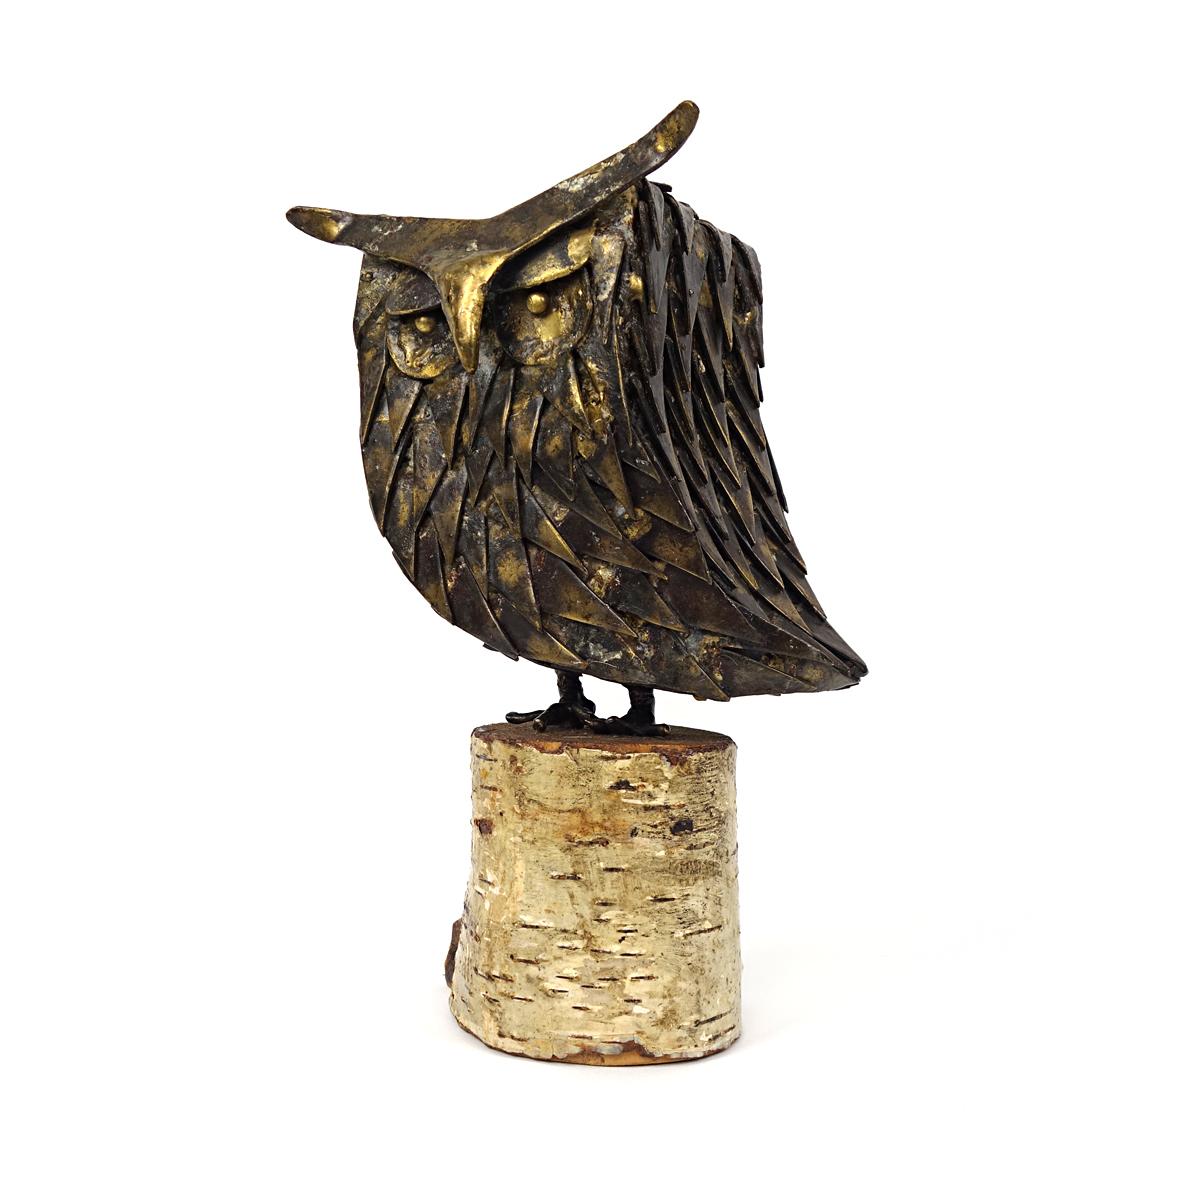 This special mid-century modern piece of art in brutalist style was made ingeniously with its feathers tile-wise all around it. The bird sits firmly on the beech trunk with its short feet, looking into the world with a wise and somewhat amused